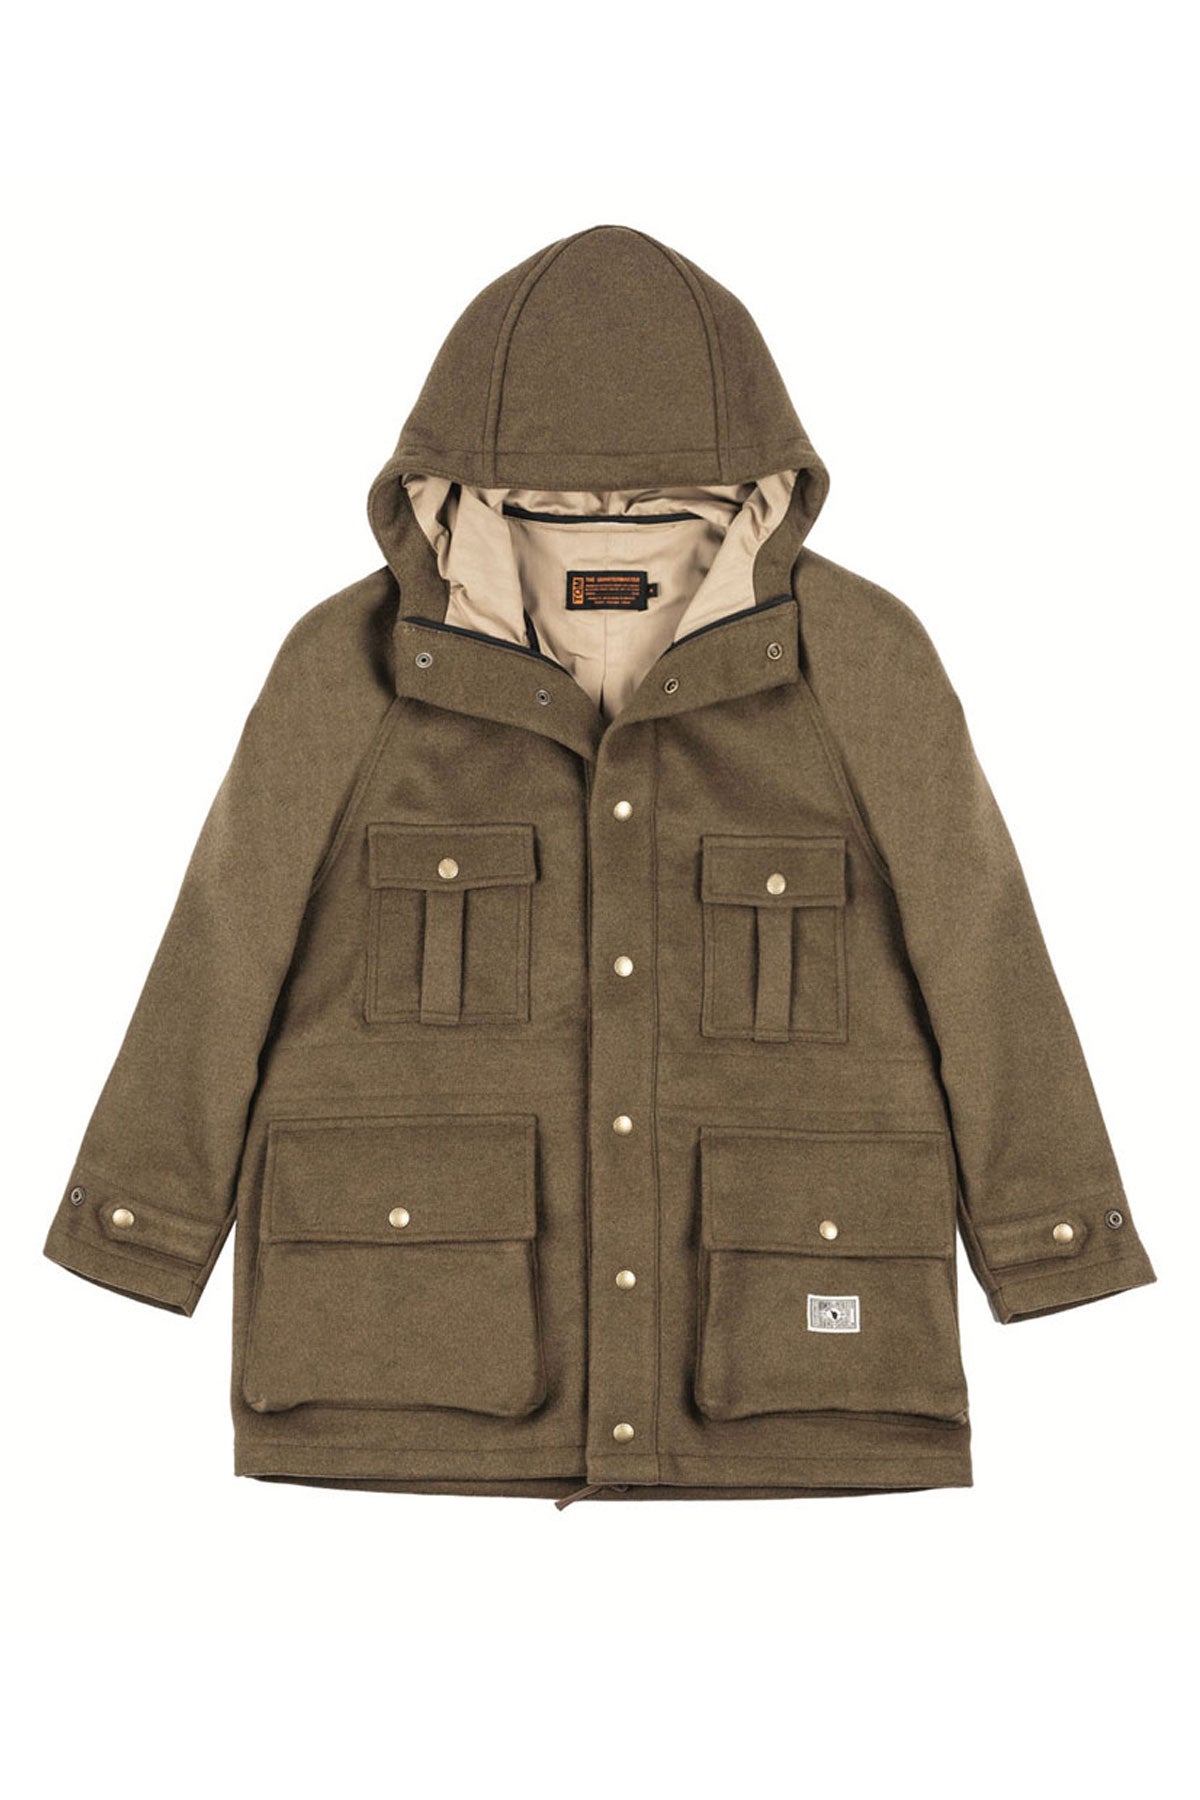 The Quartermaster - "Curzio" Wool Hooded Parka in Olive